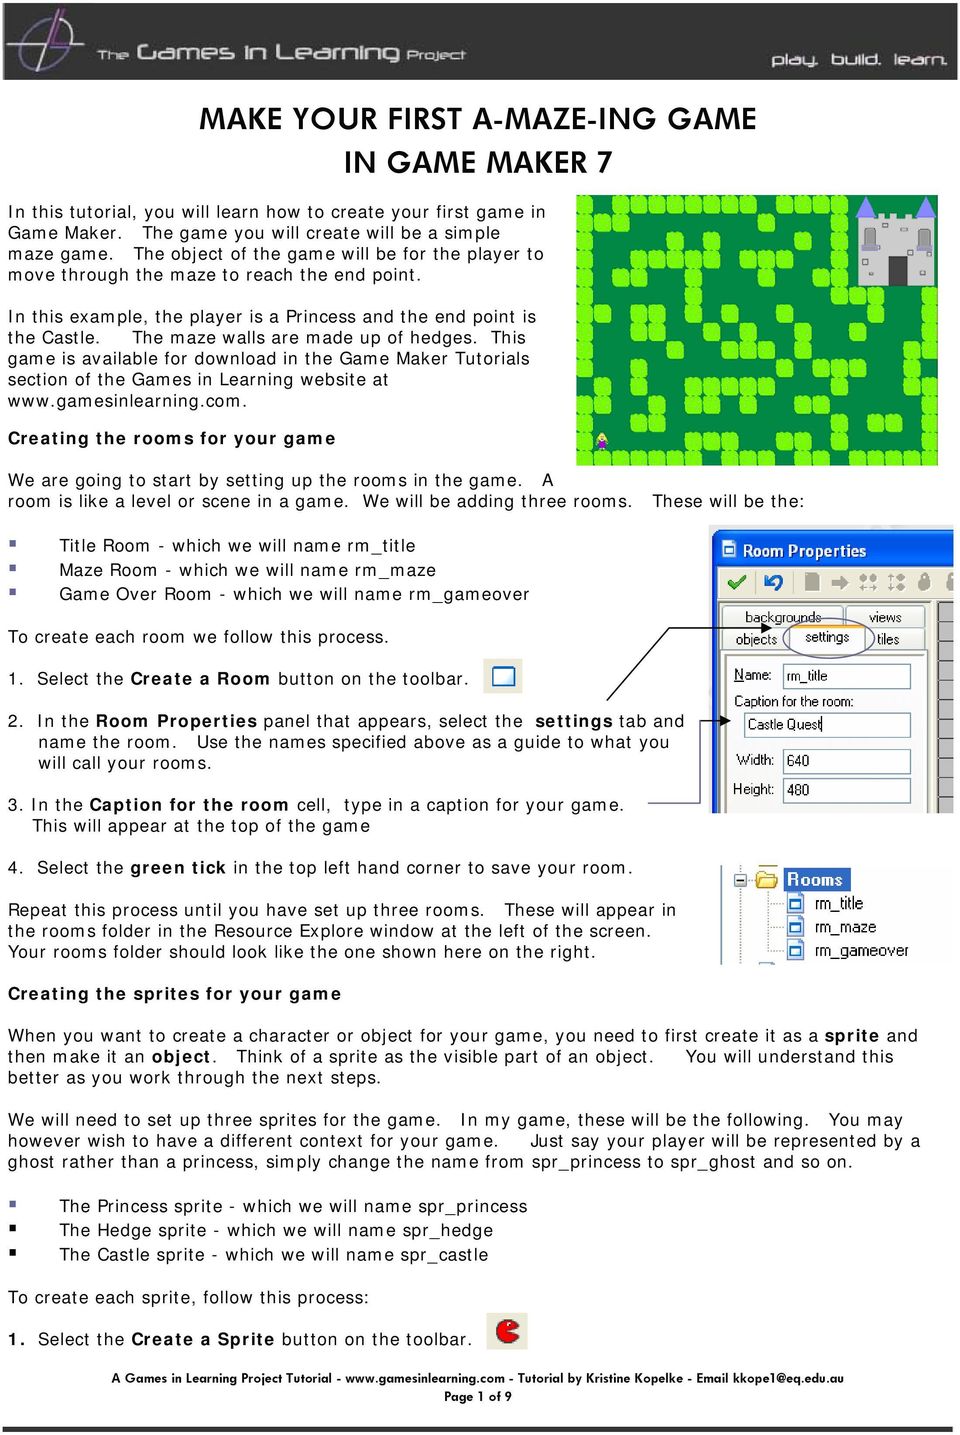 The maze walls are made up of hedges. This game is available for download in the Game Maker Tutorials section of the Games in Learning website at www.gamesinlearning.com.